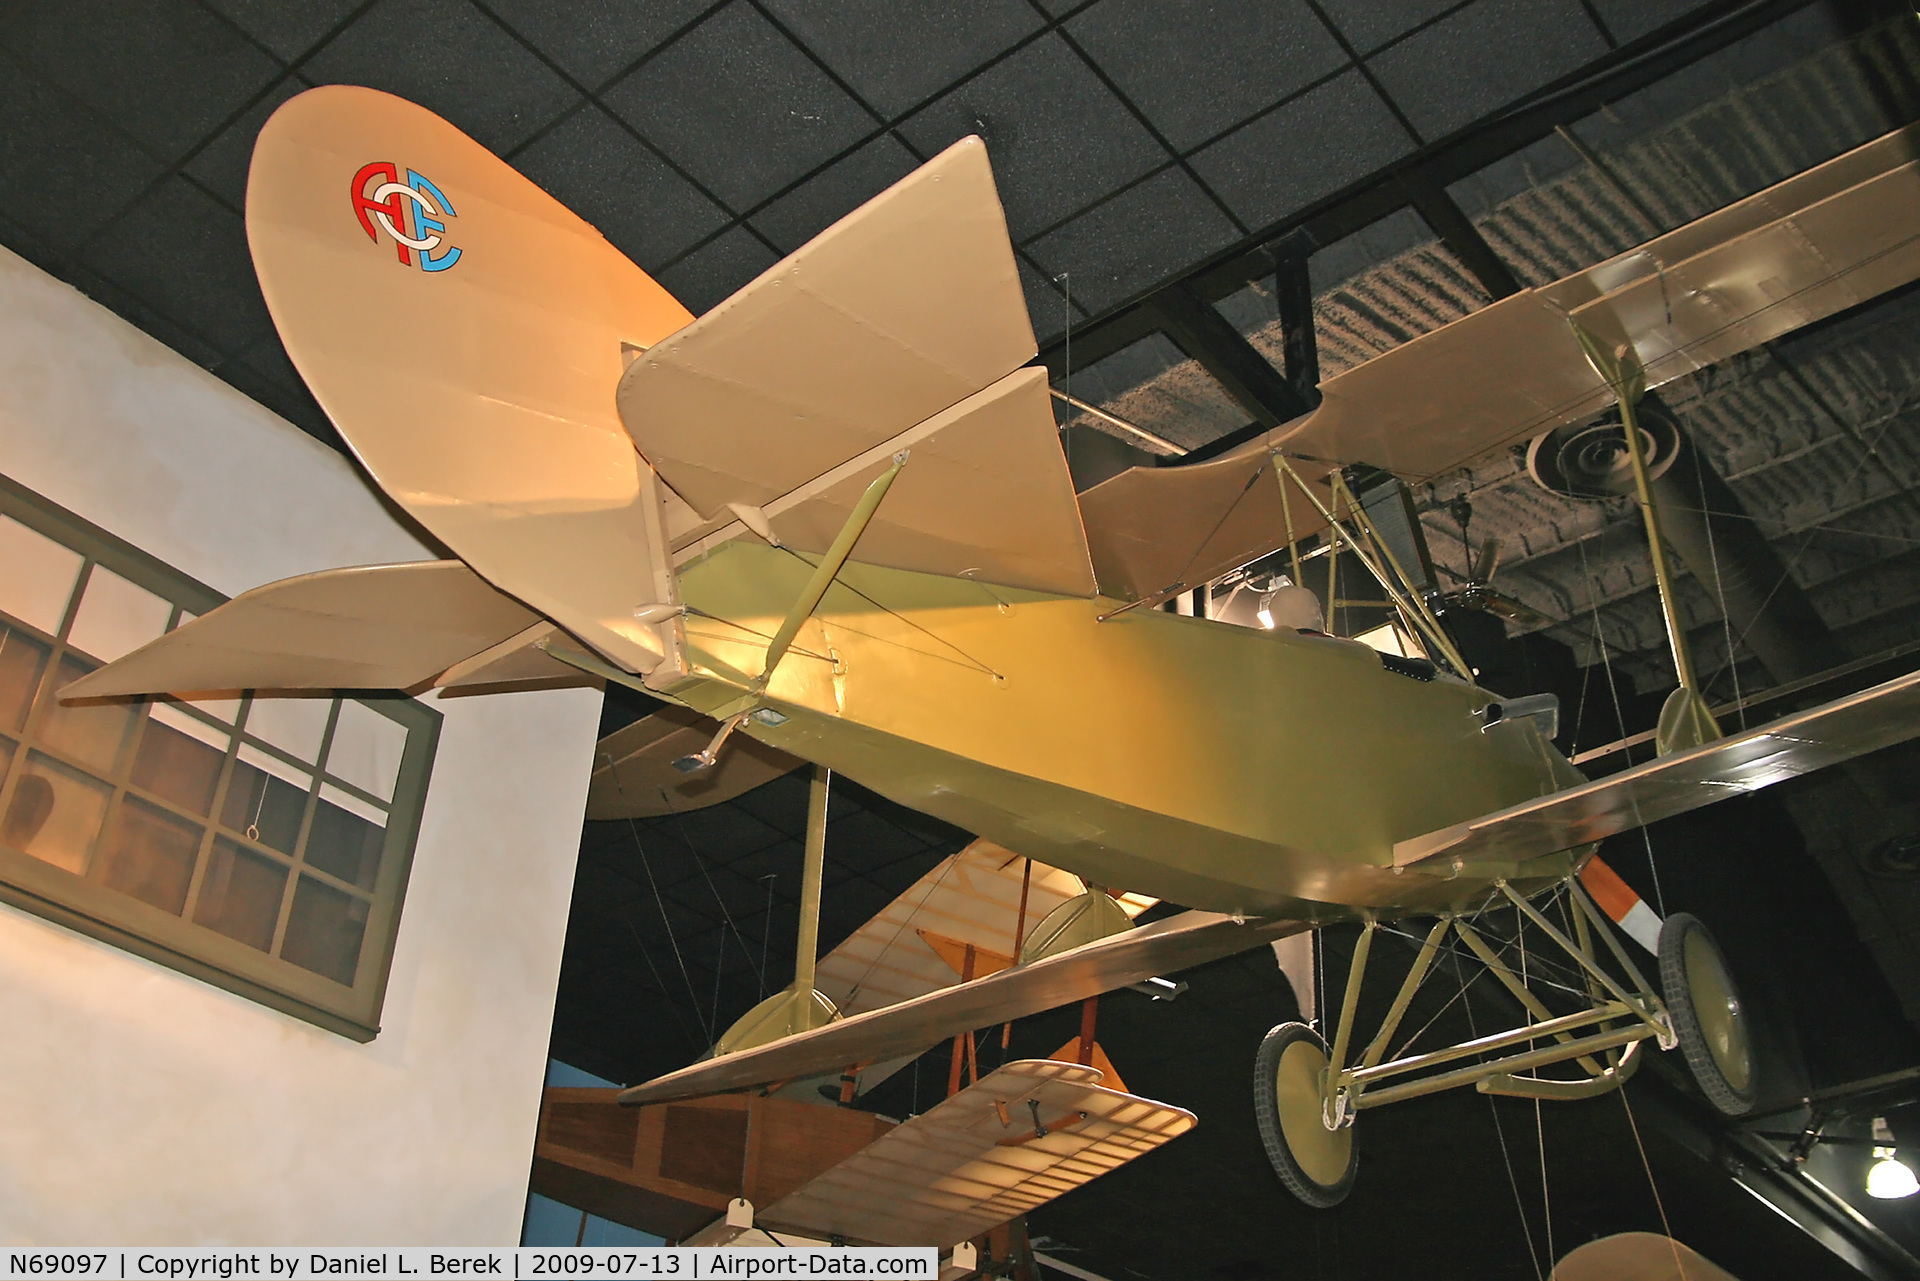 N69097, 1918 Aircraft Engineering Corp. ACE C/N 1, This aircraft, the first of its kind, has been preserved and is on display at the Cradle of Aviation Museum.